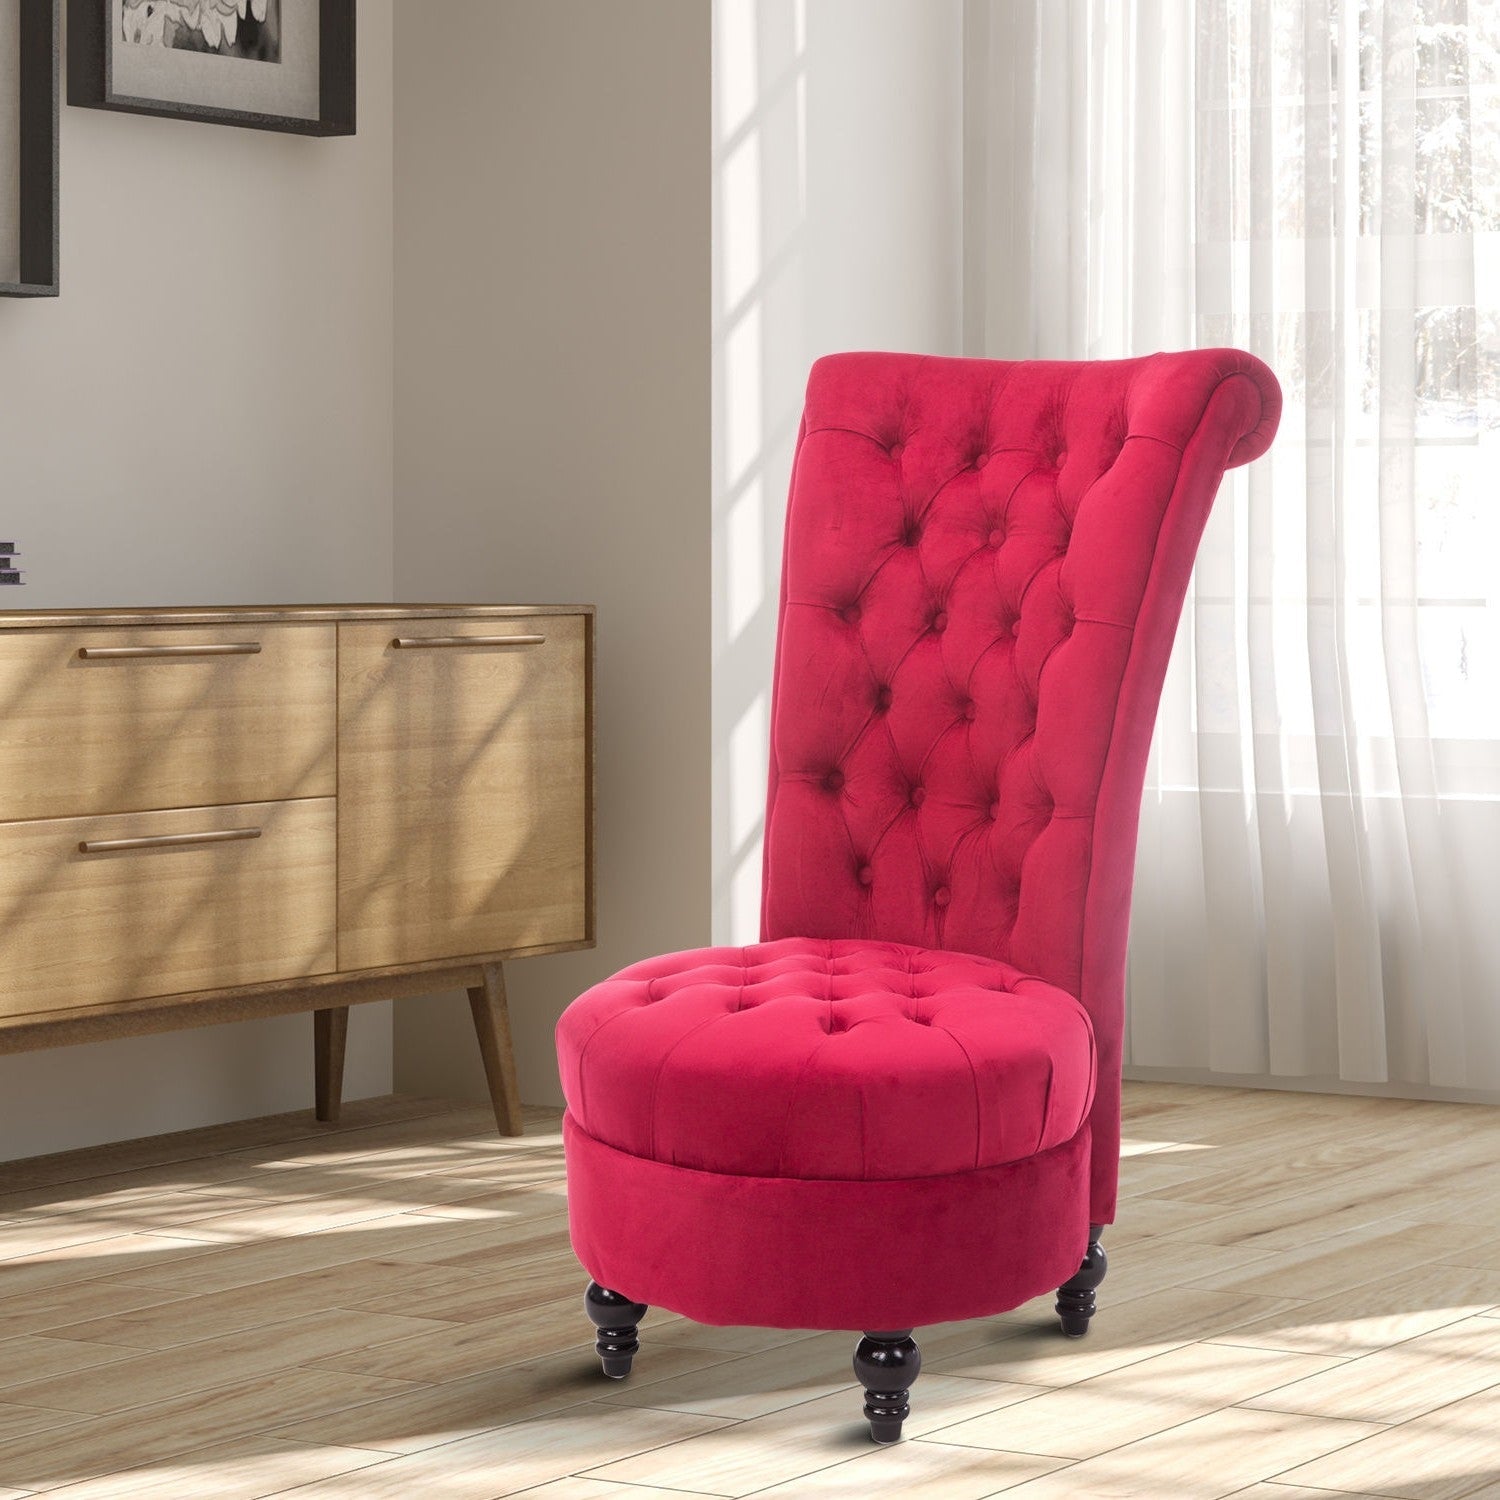 Living Room > Accent Chairs - Red Tufted High Back Plush Velvet Upholstered Accent Low Profile Chair